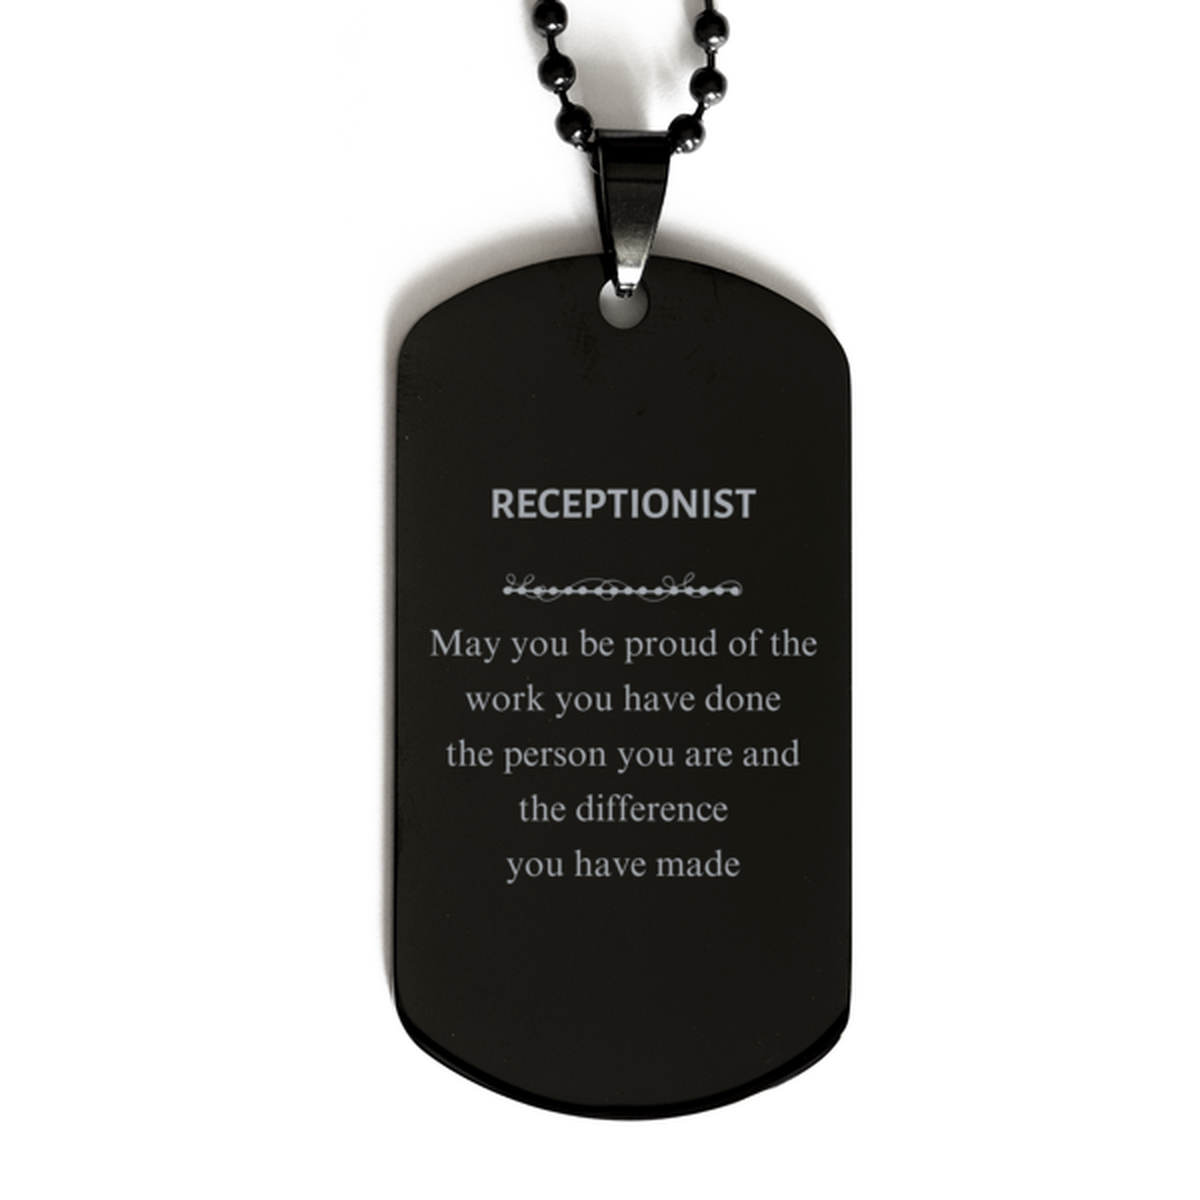 Receptionist May you be proud of the work you have done, Retirement Receptionist Black Dog Tag for Colleague Appreciation Gifts Amazing for Receptionist